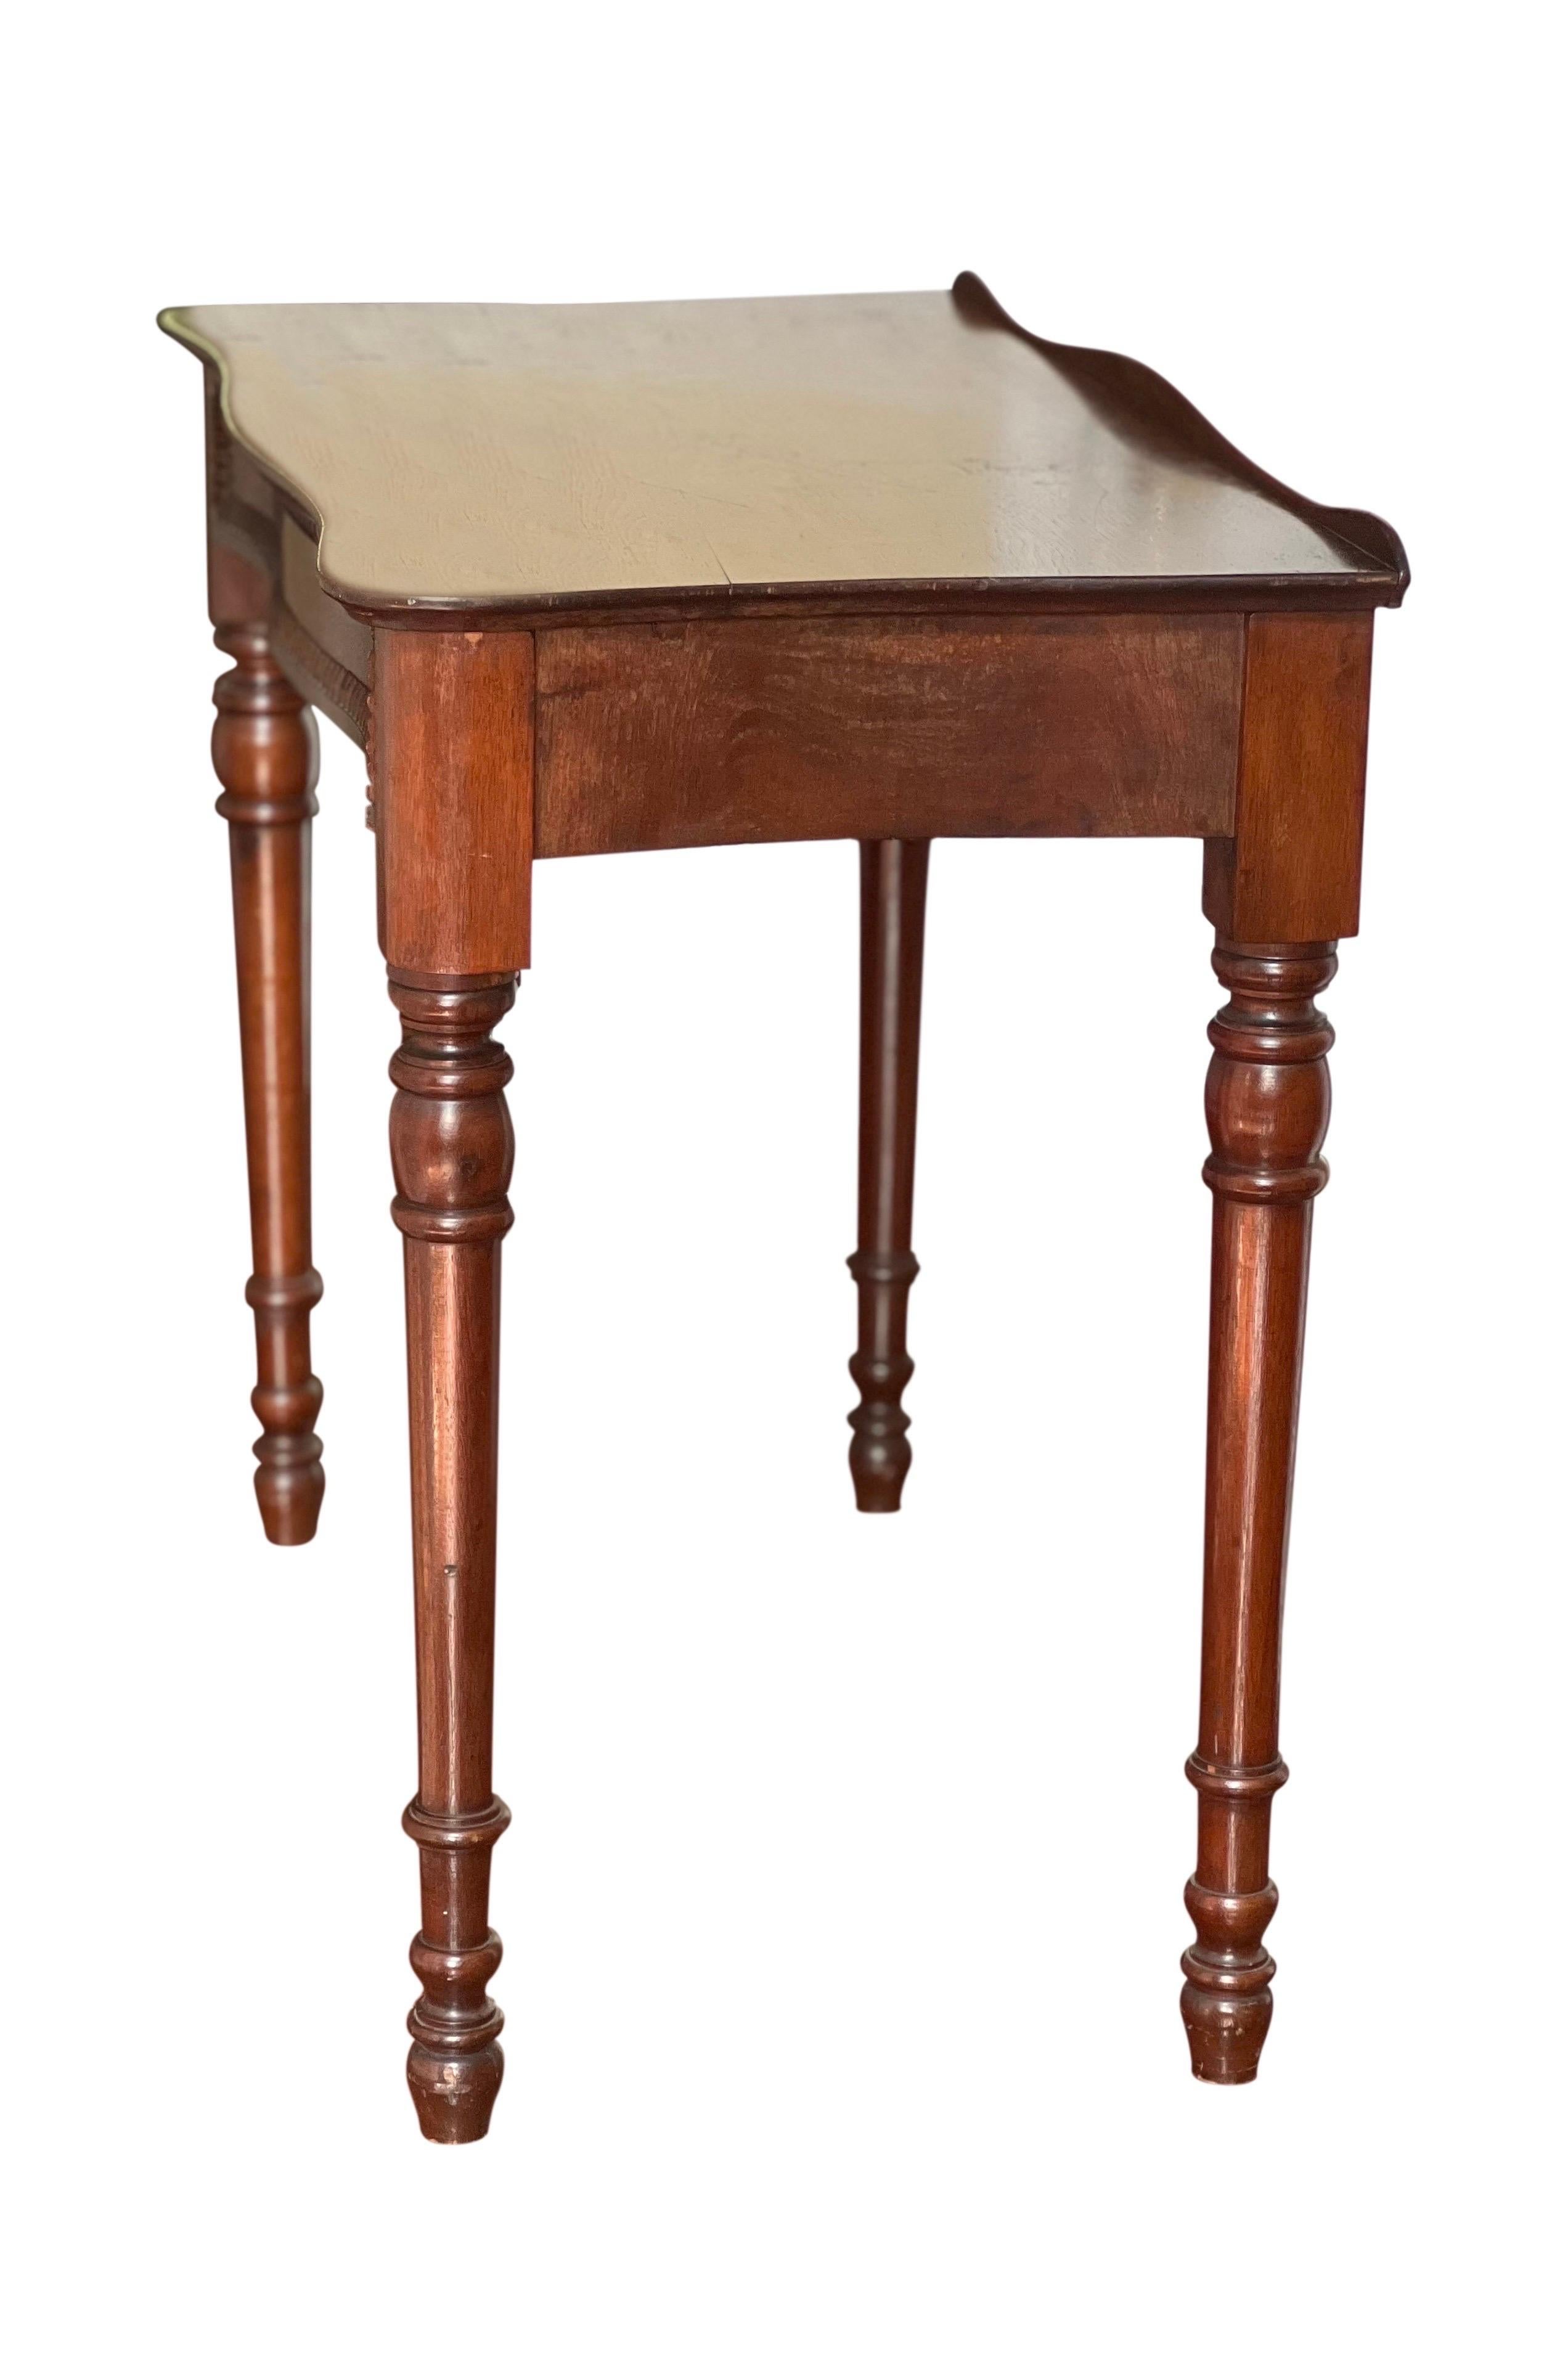 19th Century English Mahogany Serpentine Writing Desk with Single Drawer In Good Condition For Sale In Doylestown, PA